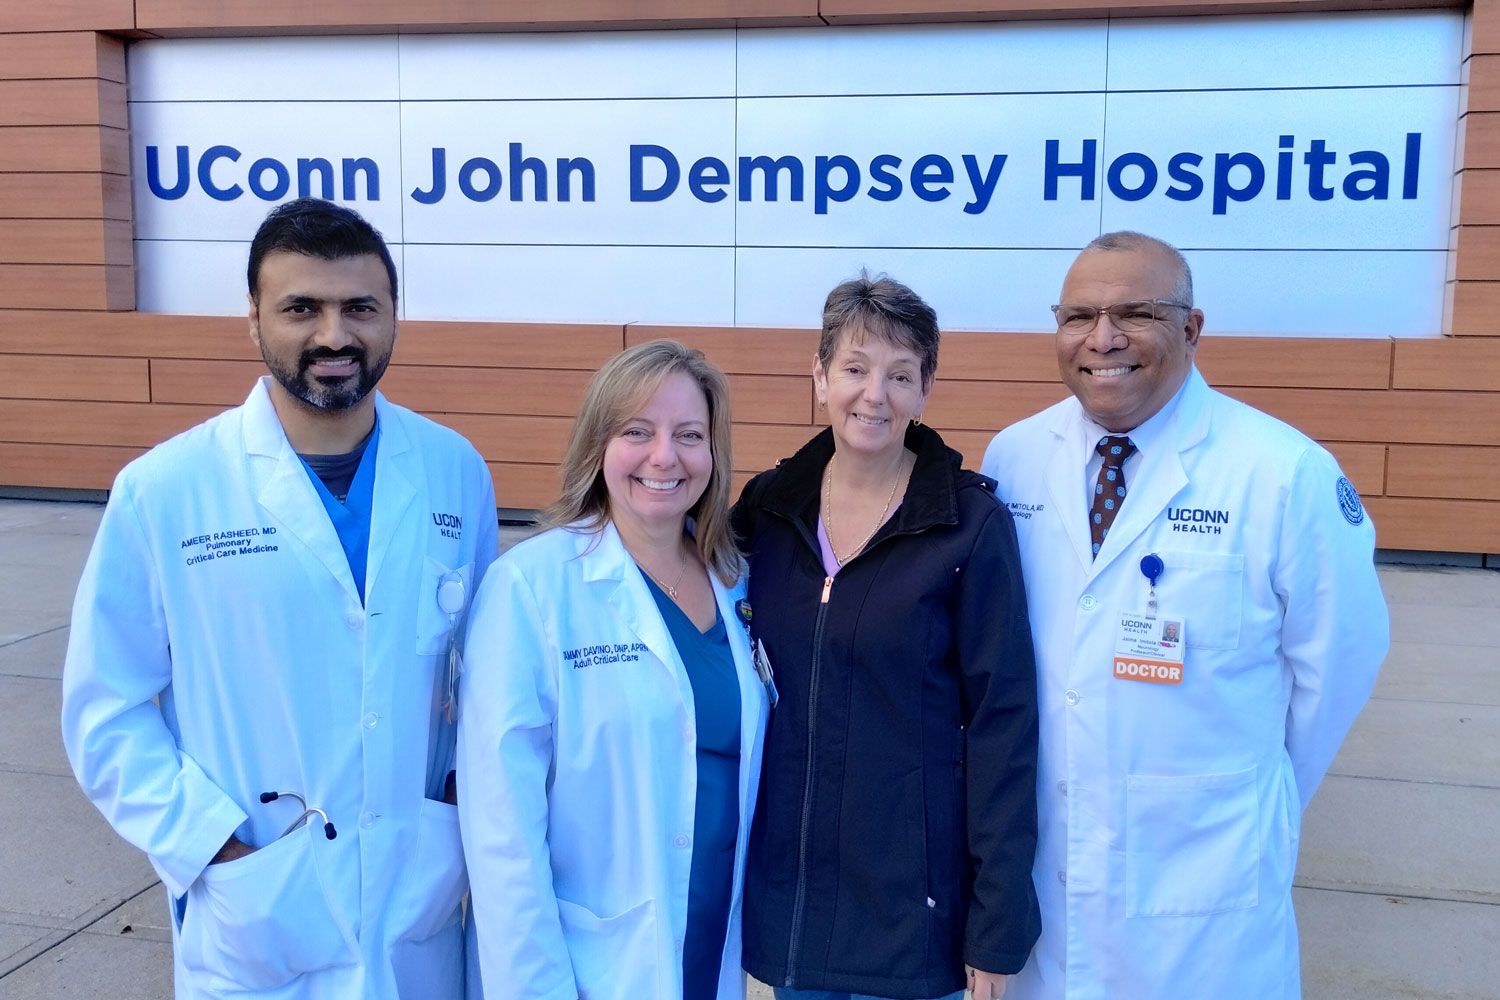 Group portrait of four in front of outdoor "UConn John Dempsey Hospital" sign.